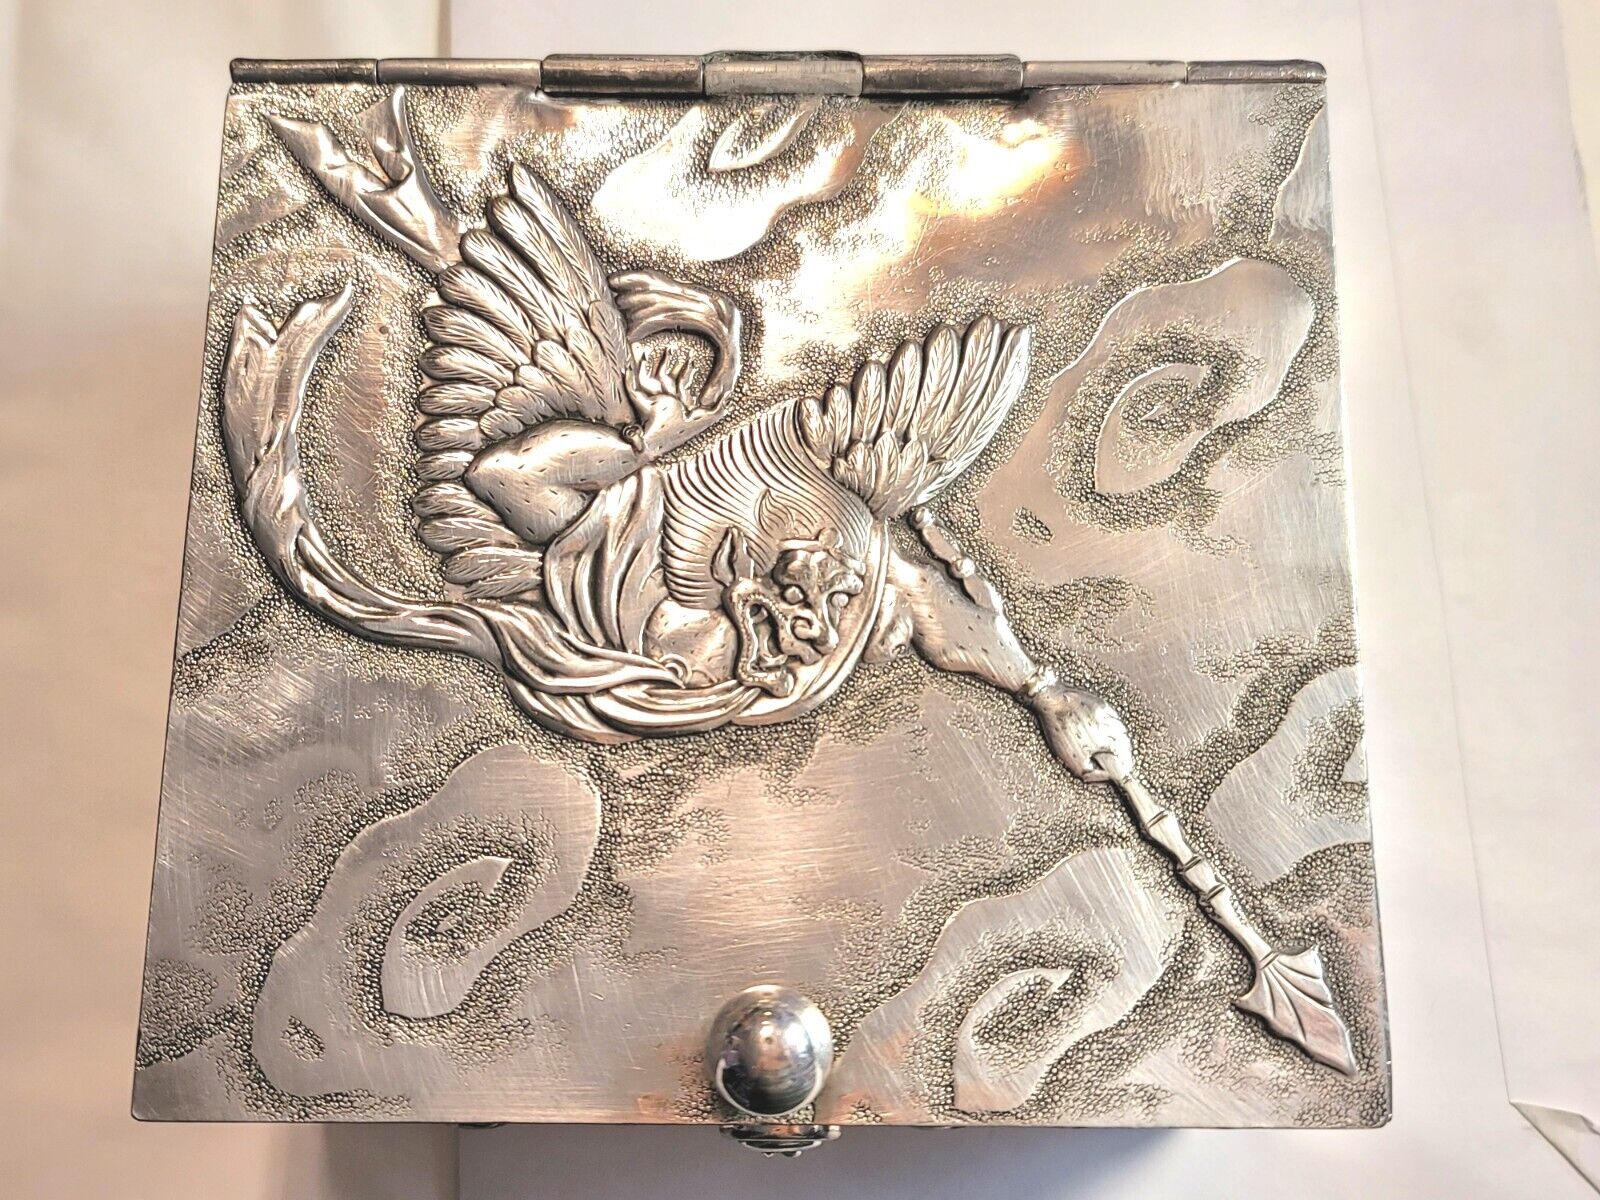 RARE Antique DERBY SILVER CO. BOX 1887,  Japanese-style art. Amazing condition. 